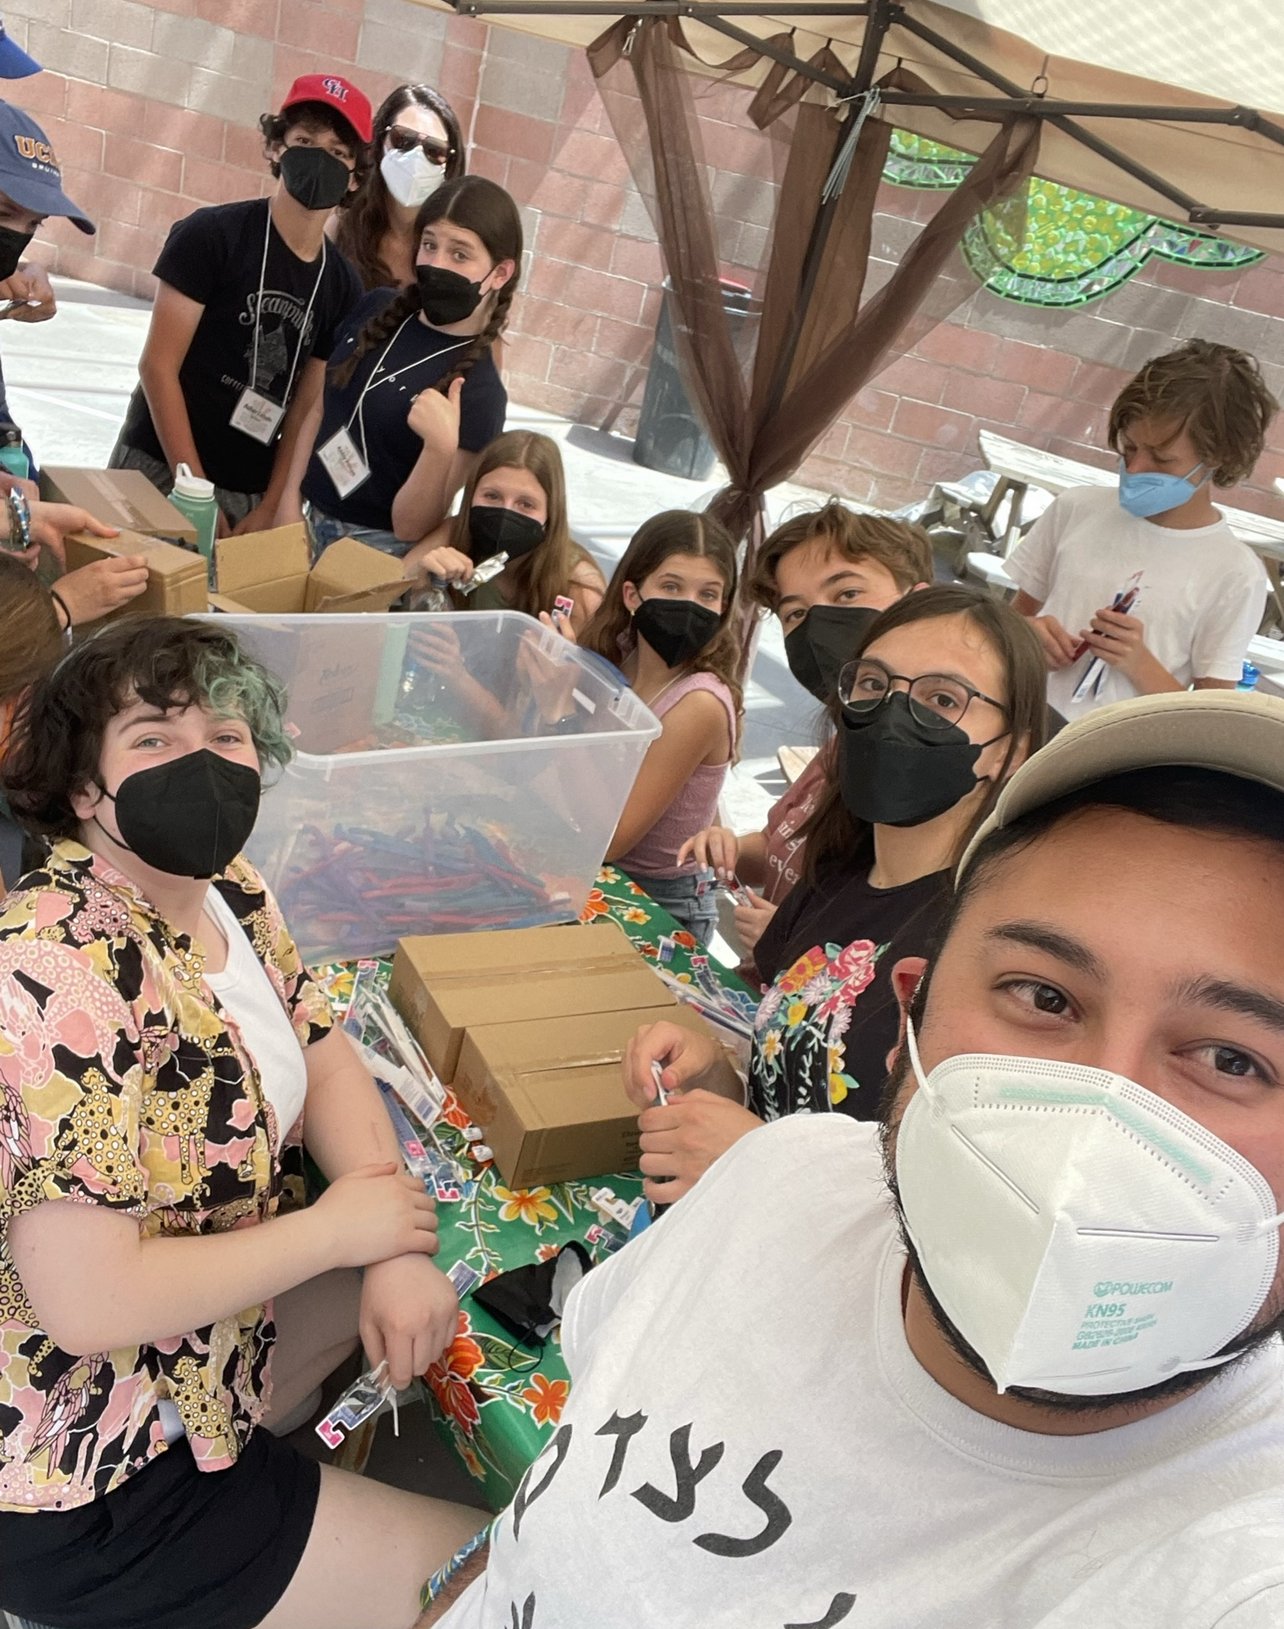  A selfie taken by a man wearing a hat of a group of people wearing masks packing items into a storage container and make as if they’re smiling.  